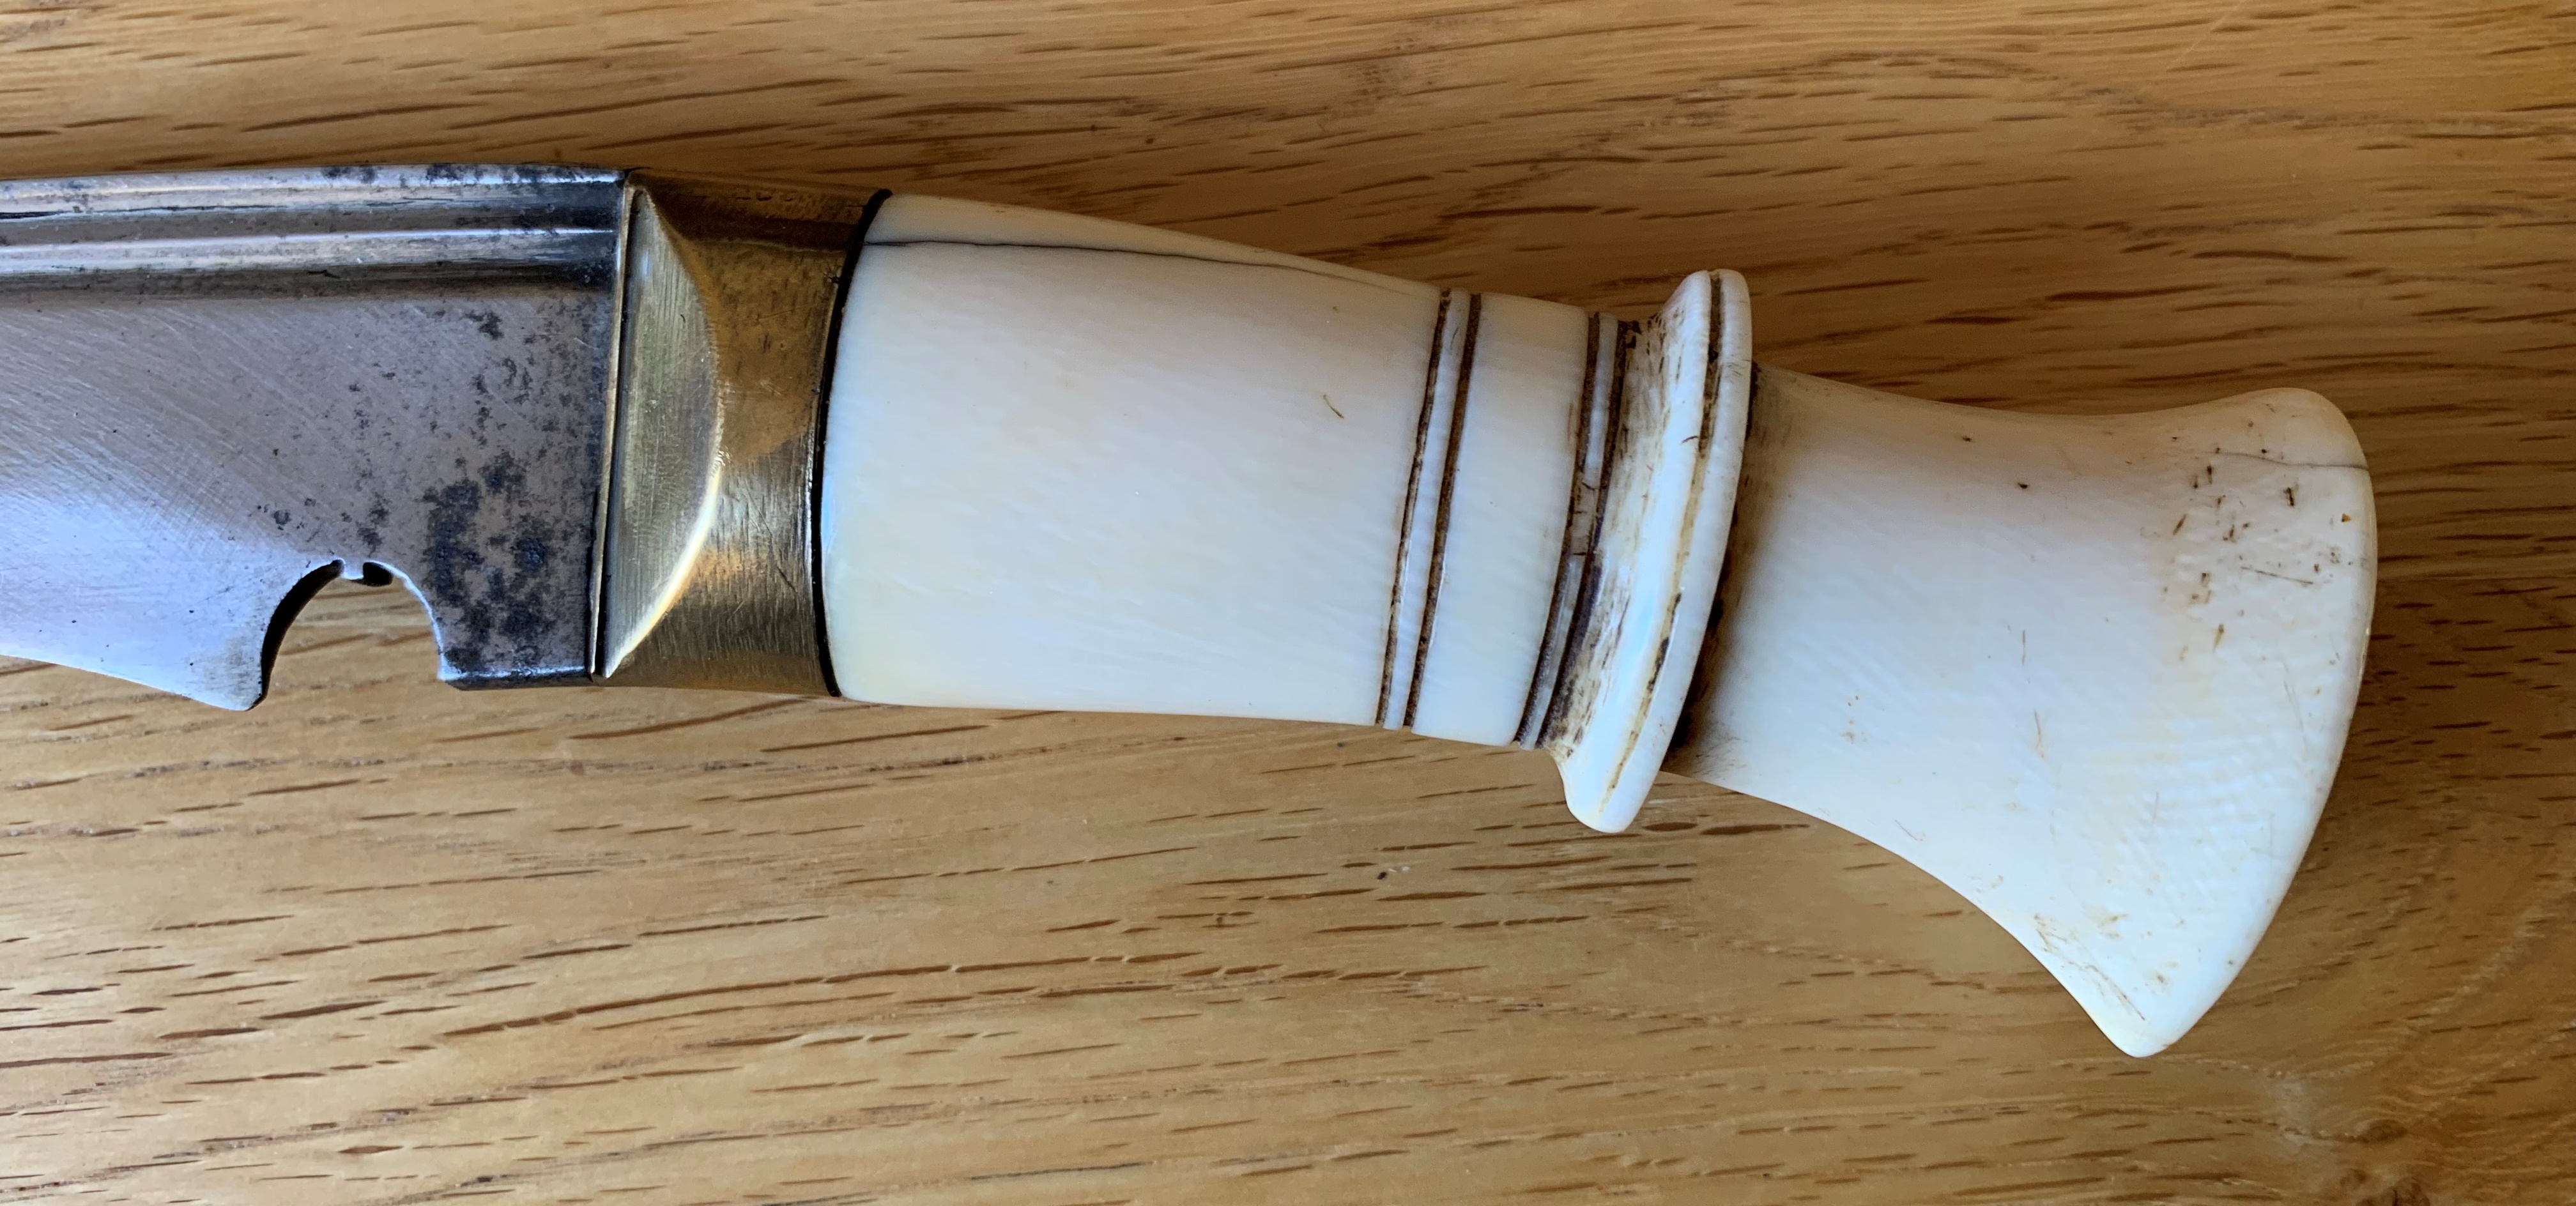 A superb Ivory handled kukri, probably WW1 era, the scabbard inner is original, but the outer is a - Image 4 of 6